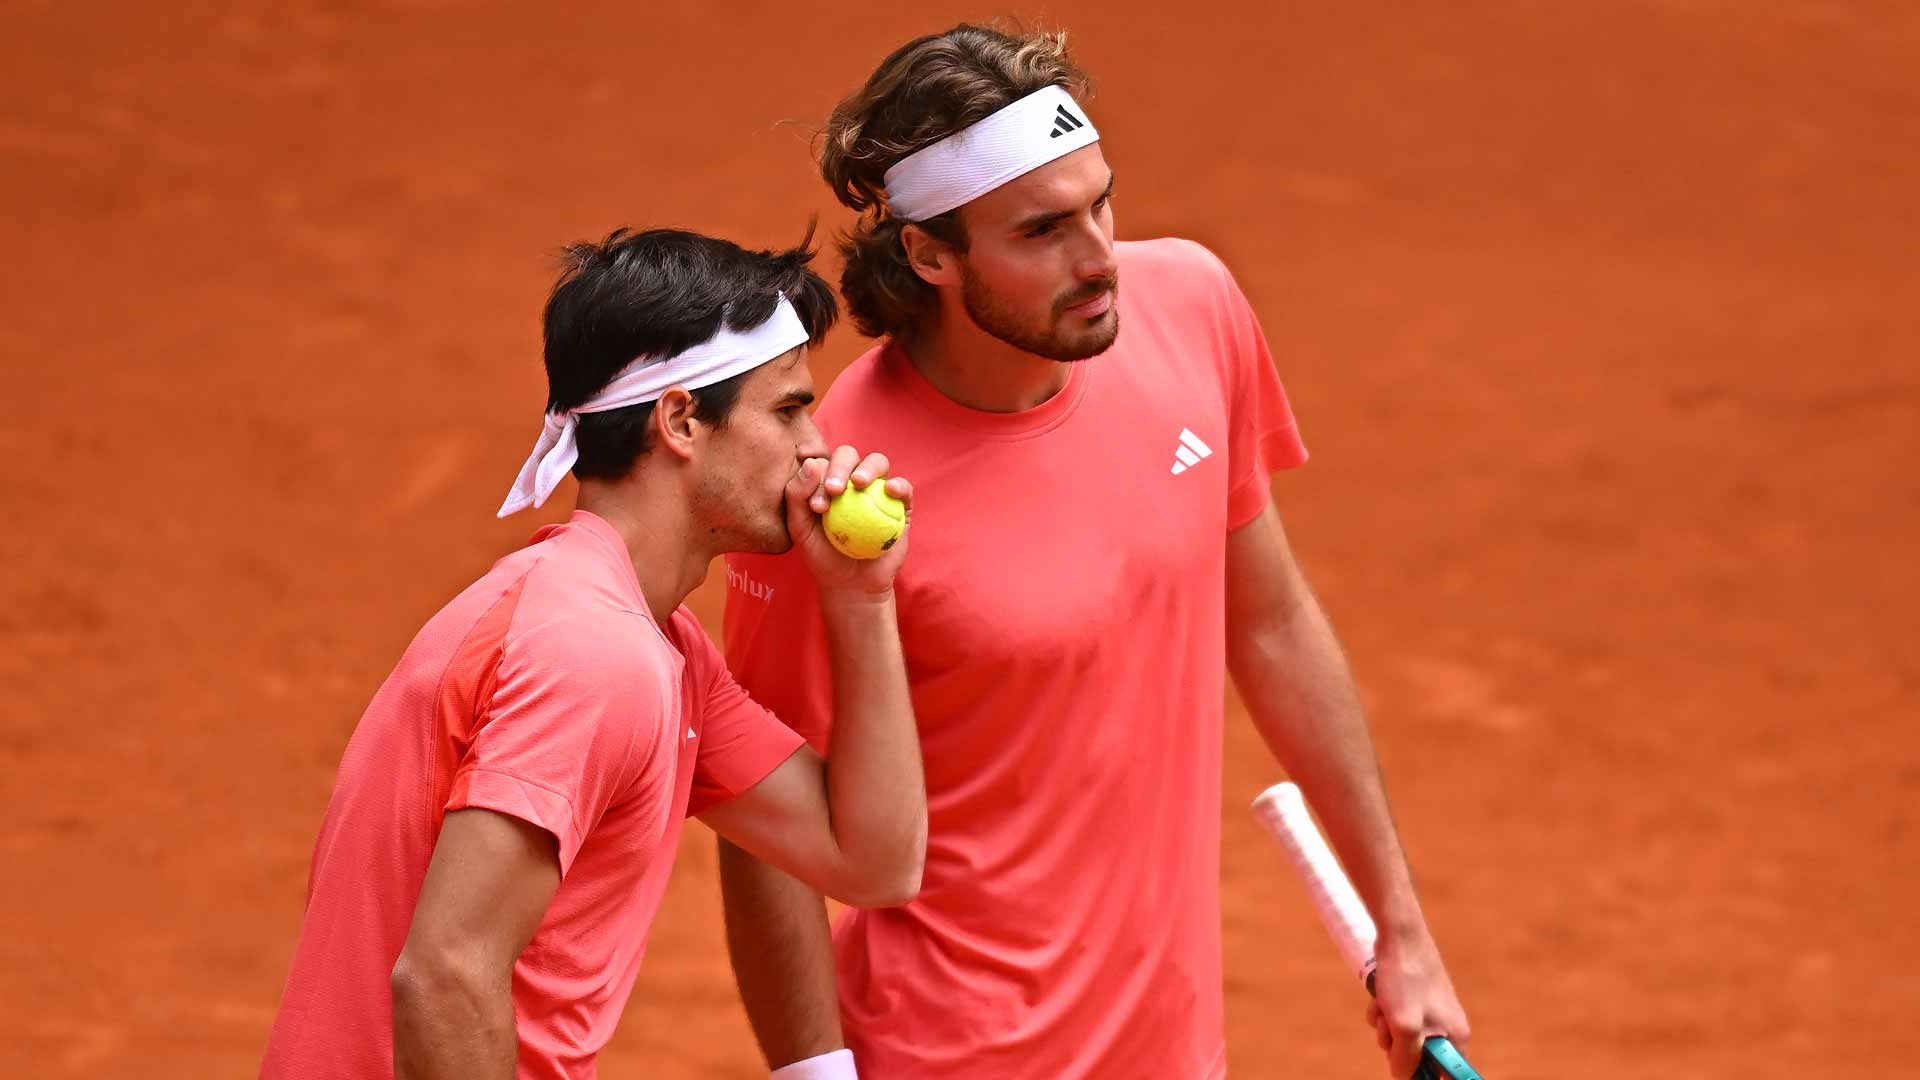 Who will Tsitsipas brothers, Evans/Murray play in Roland Garros doubles draw?